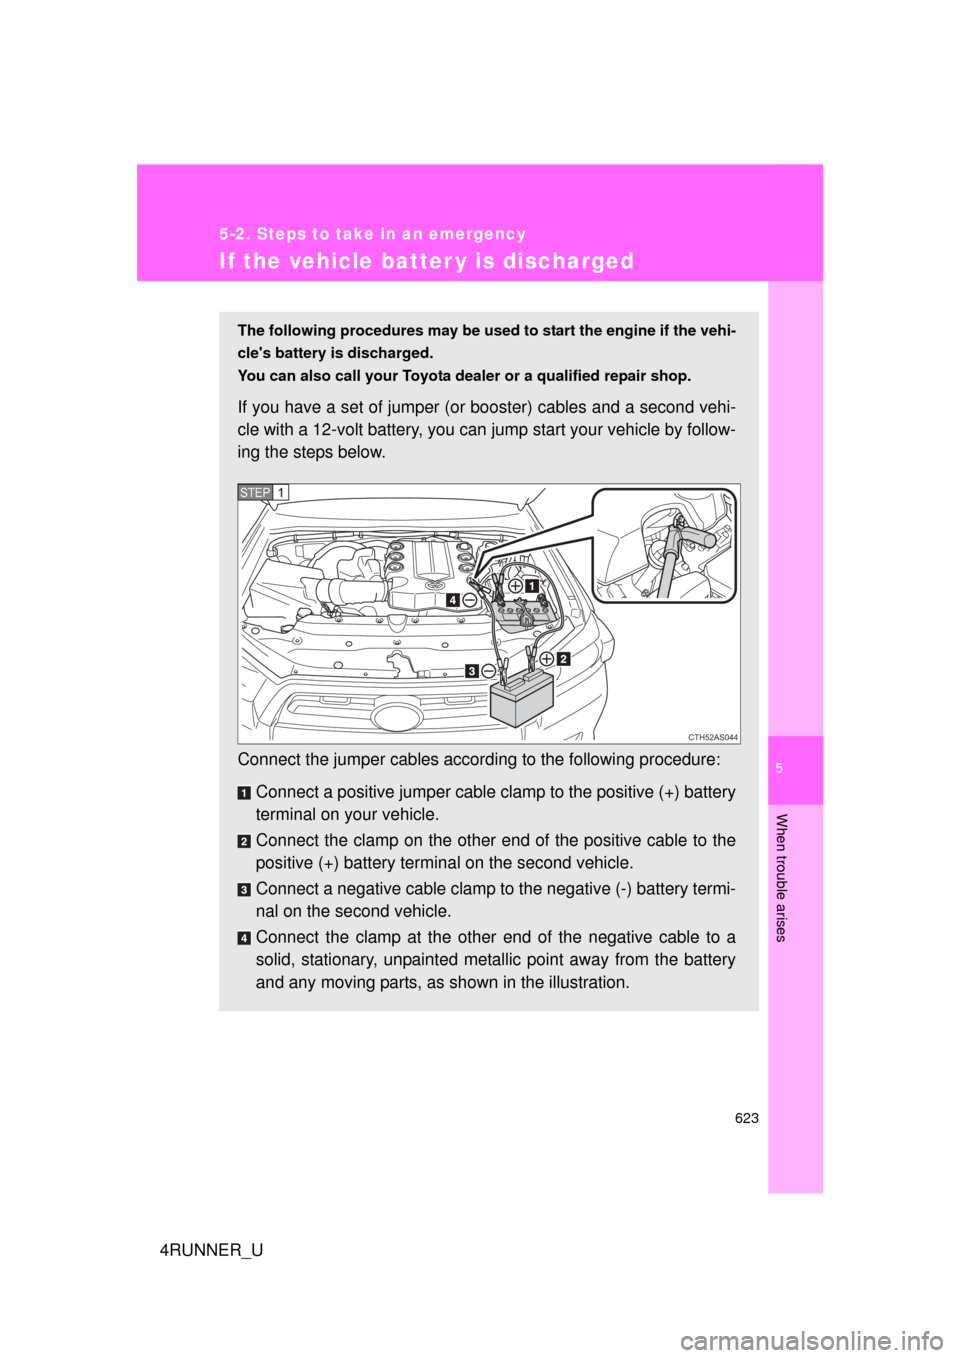 TOYOTA 4RUNNER 2012 N280 / 5.G Owners Manual 5
When trouble arises
623
5-2. Steps to take in an emergency
4RUNNER_U
If the vehicle batter y is discharged
The following procedures may be used to start the engine if the vehi-
cles battery is disc